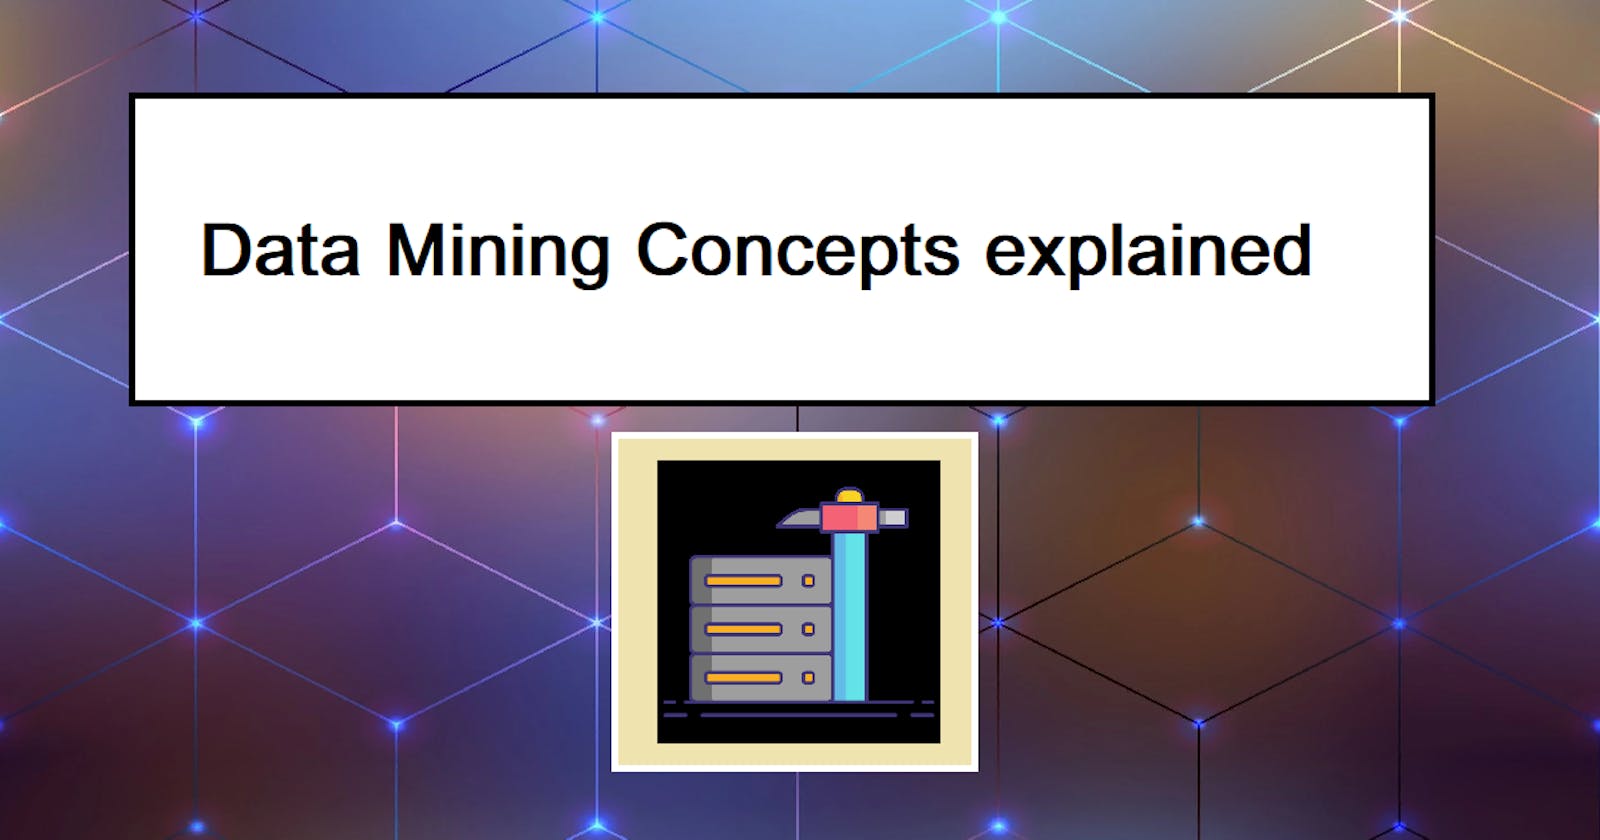 Data Mining Concepts explained